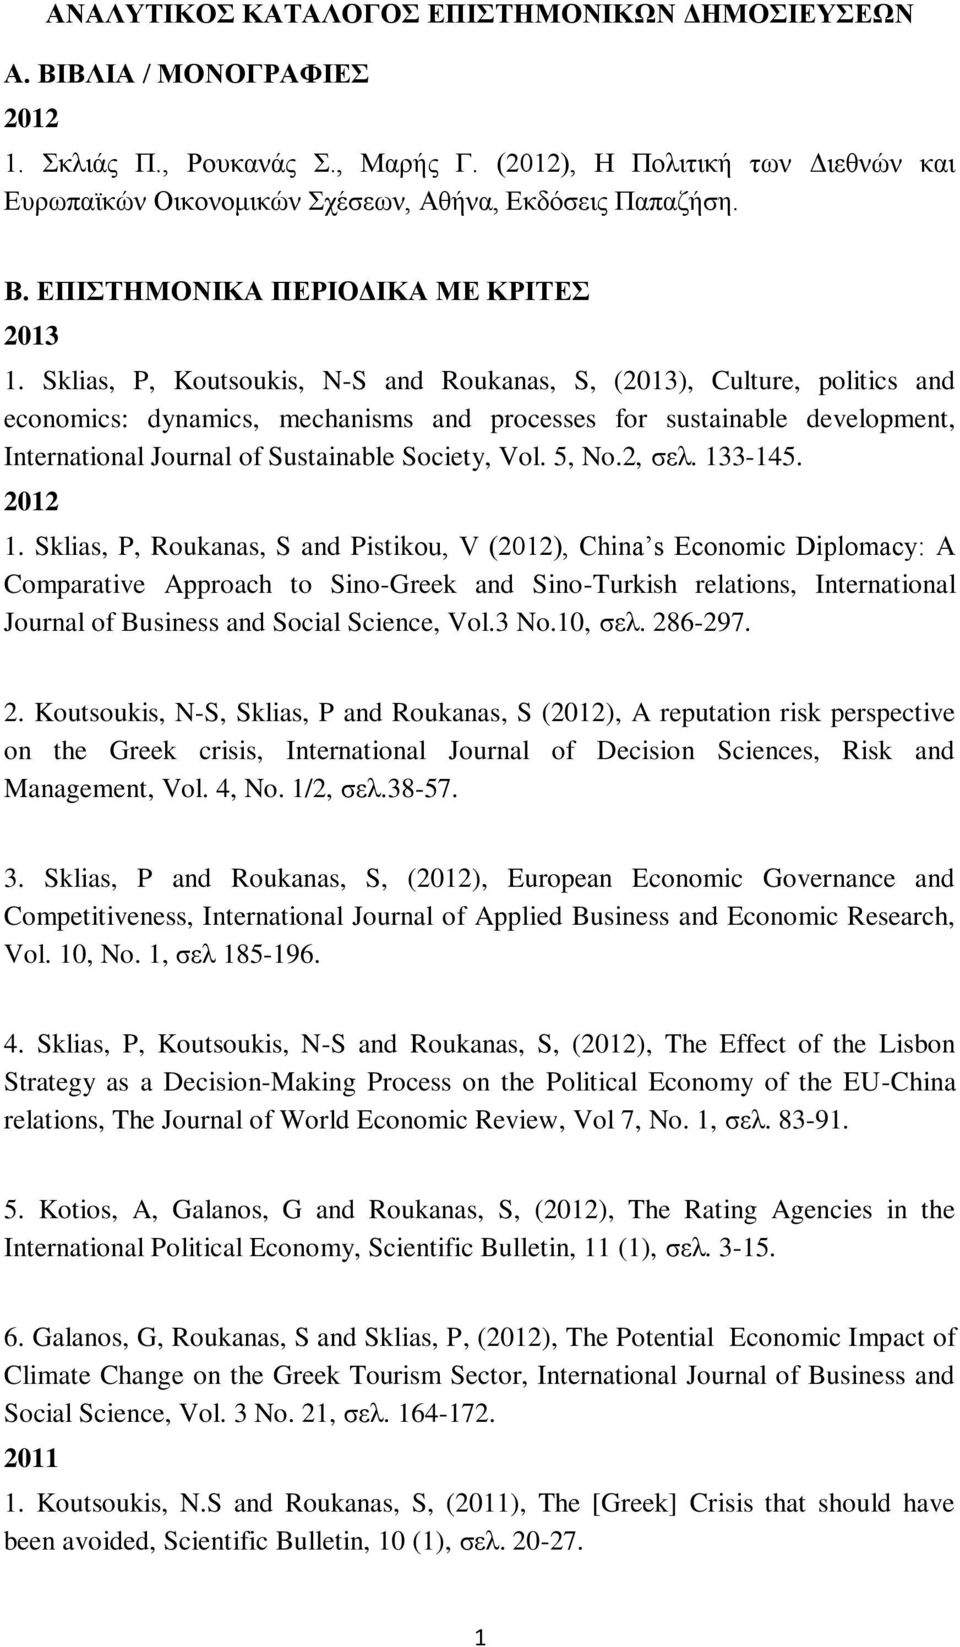 Sklias, P, Koutsoukis, N-S and Roukanas, S, (2013), Culture, politics and economics: dynamics, mechanisms and processes for sustainable development, International Journal of Sustainable Society, Vol.